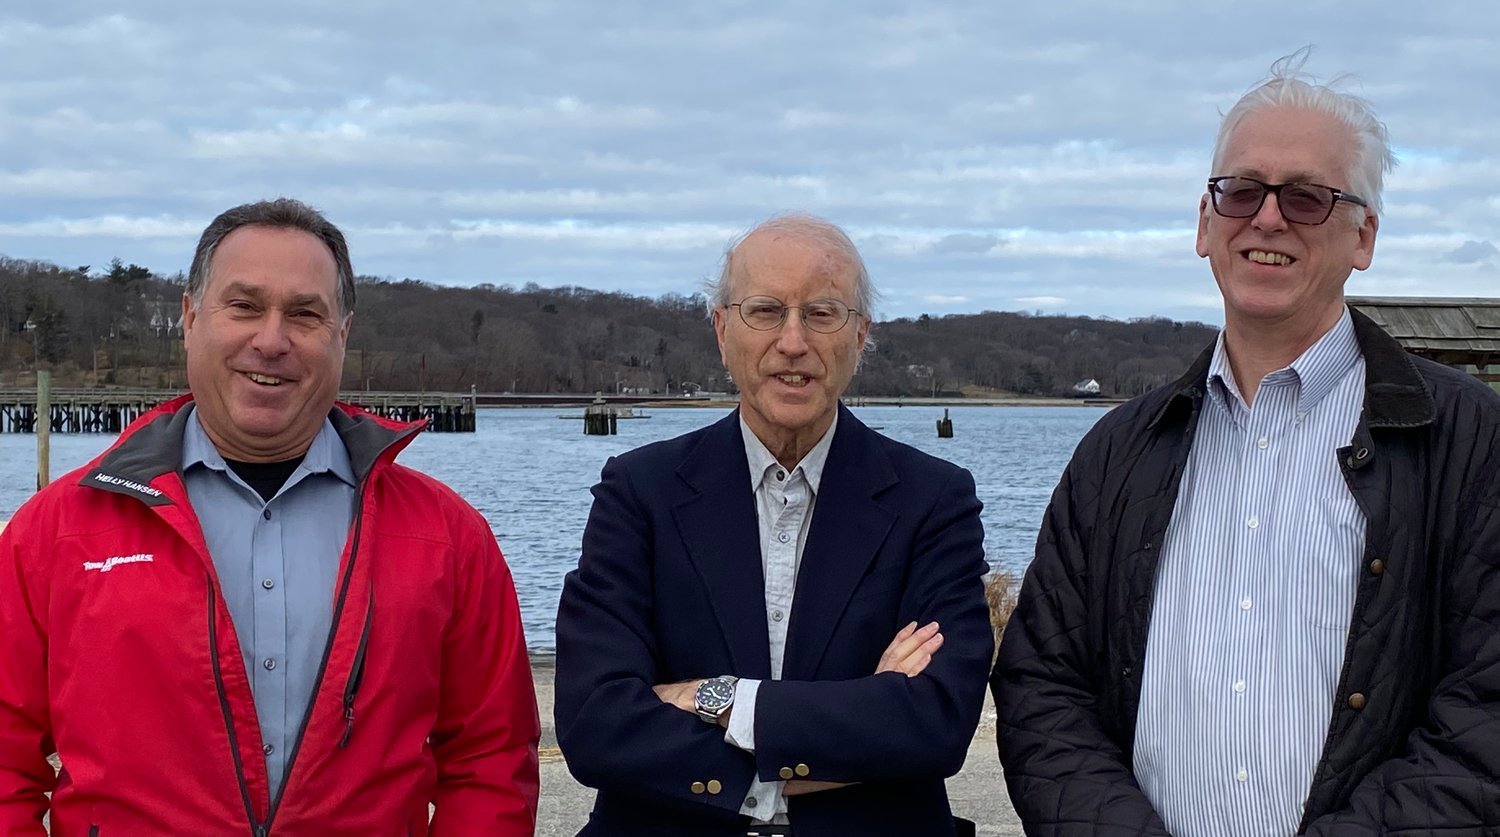 Friends of the Bay is looking to enhance its environmental conservation efforts under the new leadership of Mitch Kramer, left, Bill Bleyer and Eric Swenson.